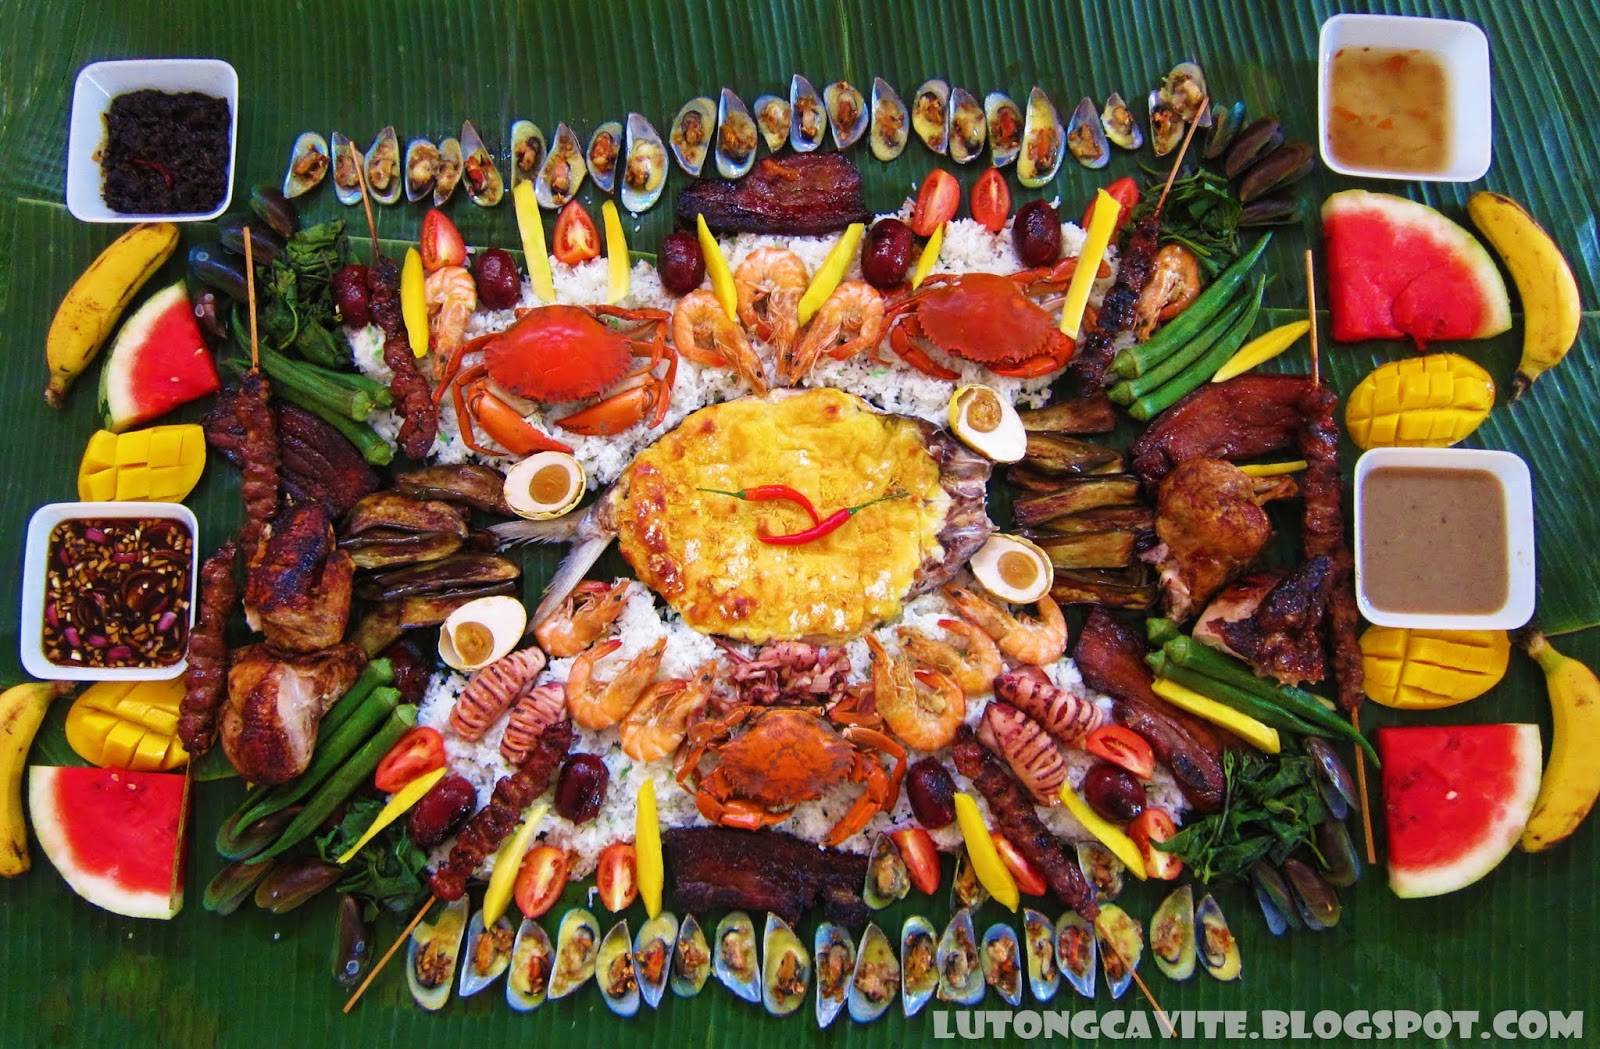 Lutong Cavite : Boodle Fight